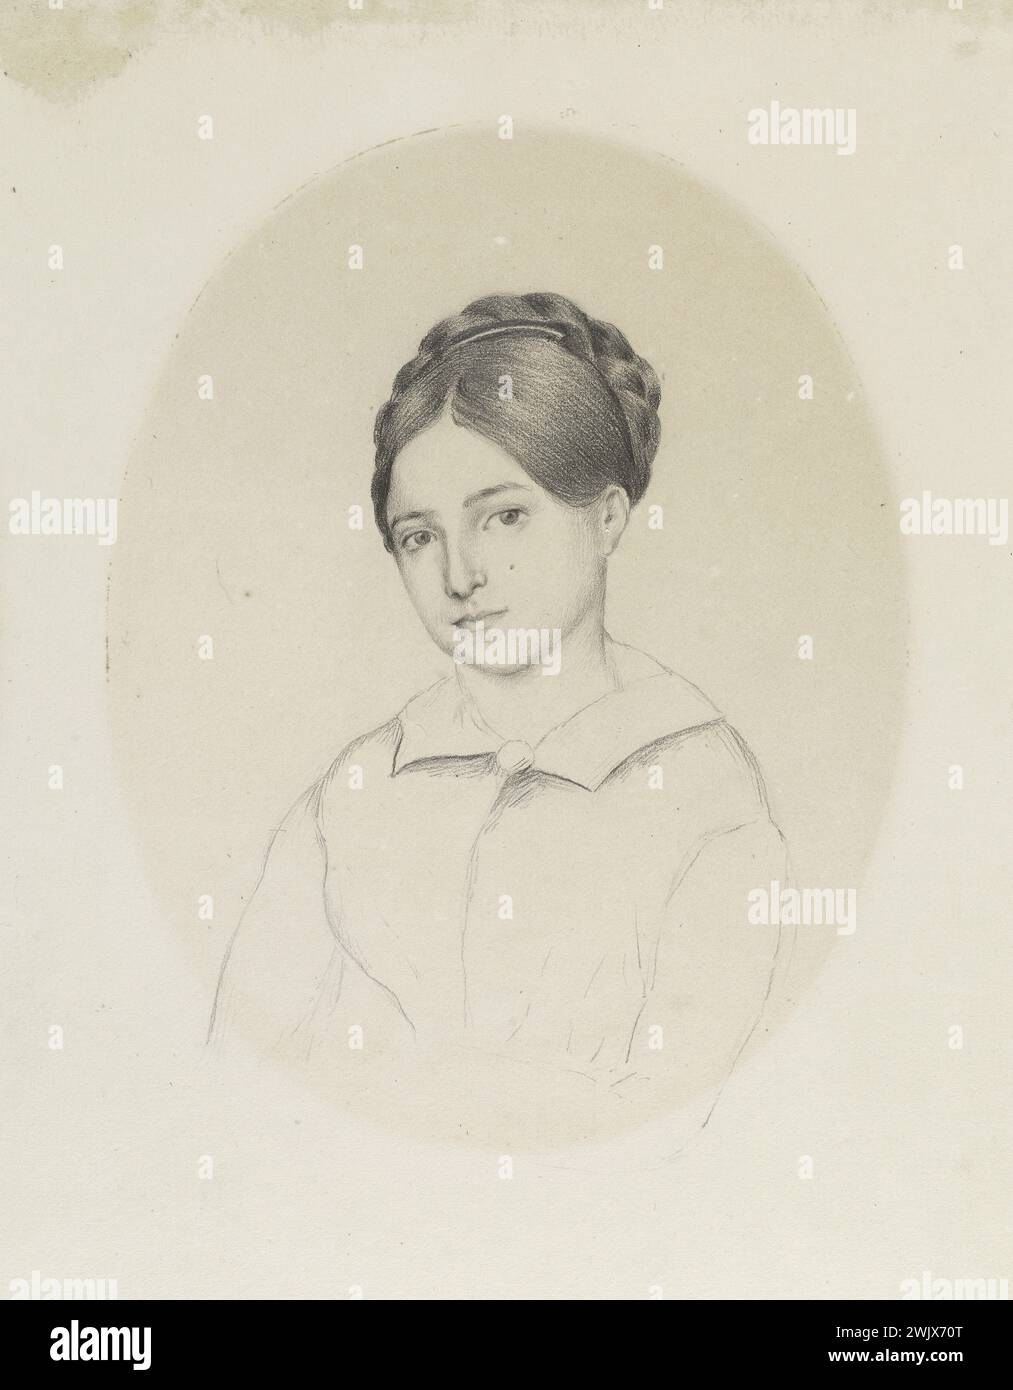 Madame Hugo. 'Léopoldine'. Graphite pencil on paper. 1843. Paris, house of Victor Hugo. 52739-8 Graphite pencil, drawing, French writer, in bust, daughter, portrait, 19th XIXth 19th 19th 19th 19th century Stock Photo